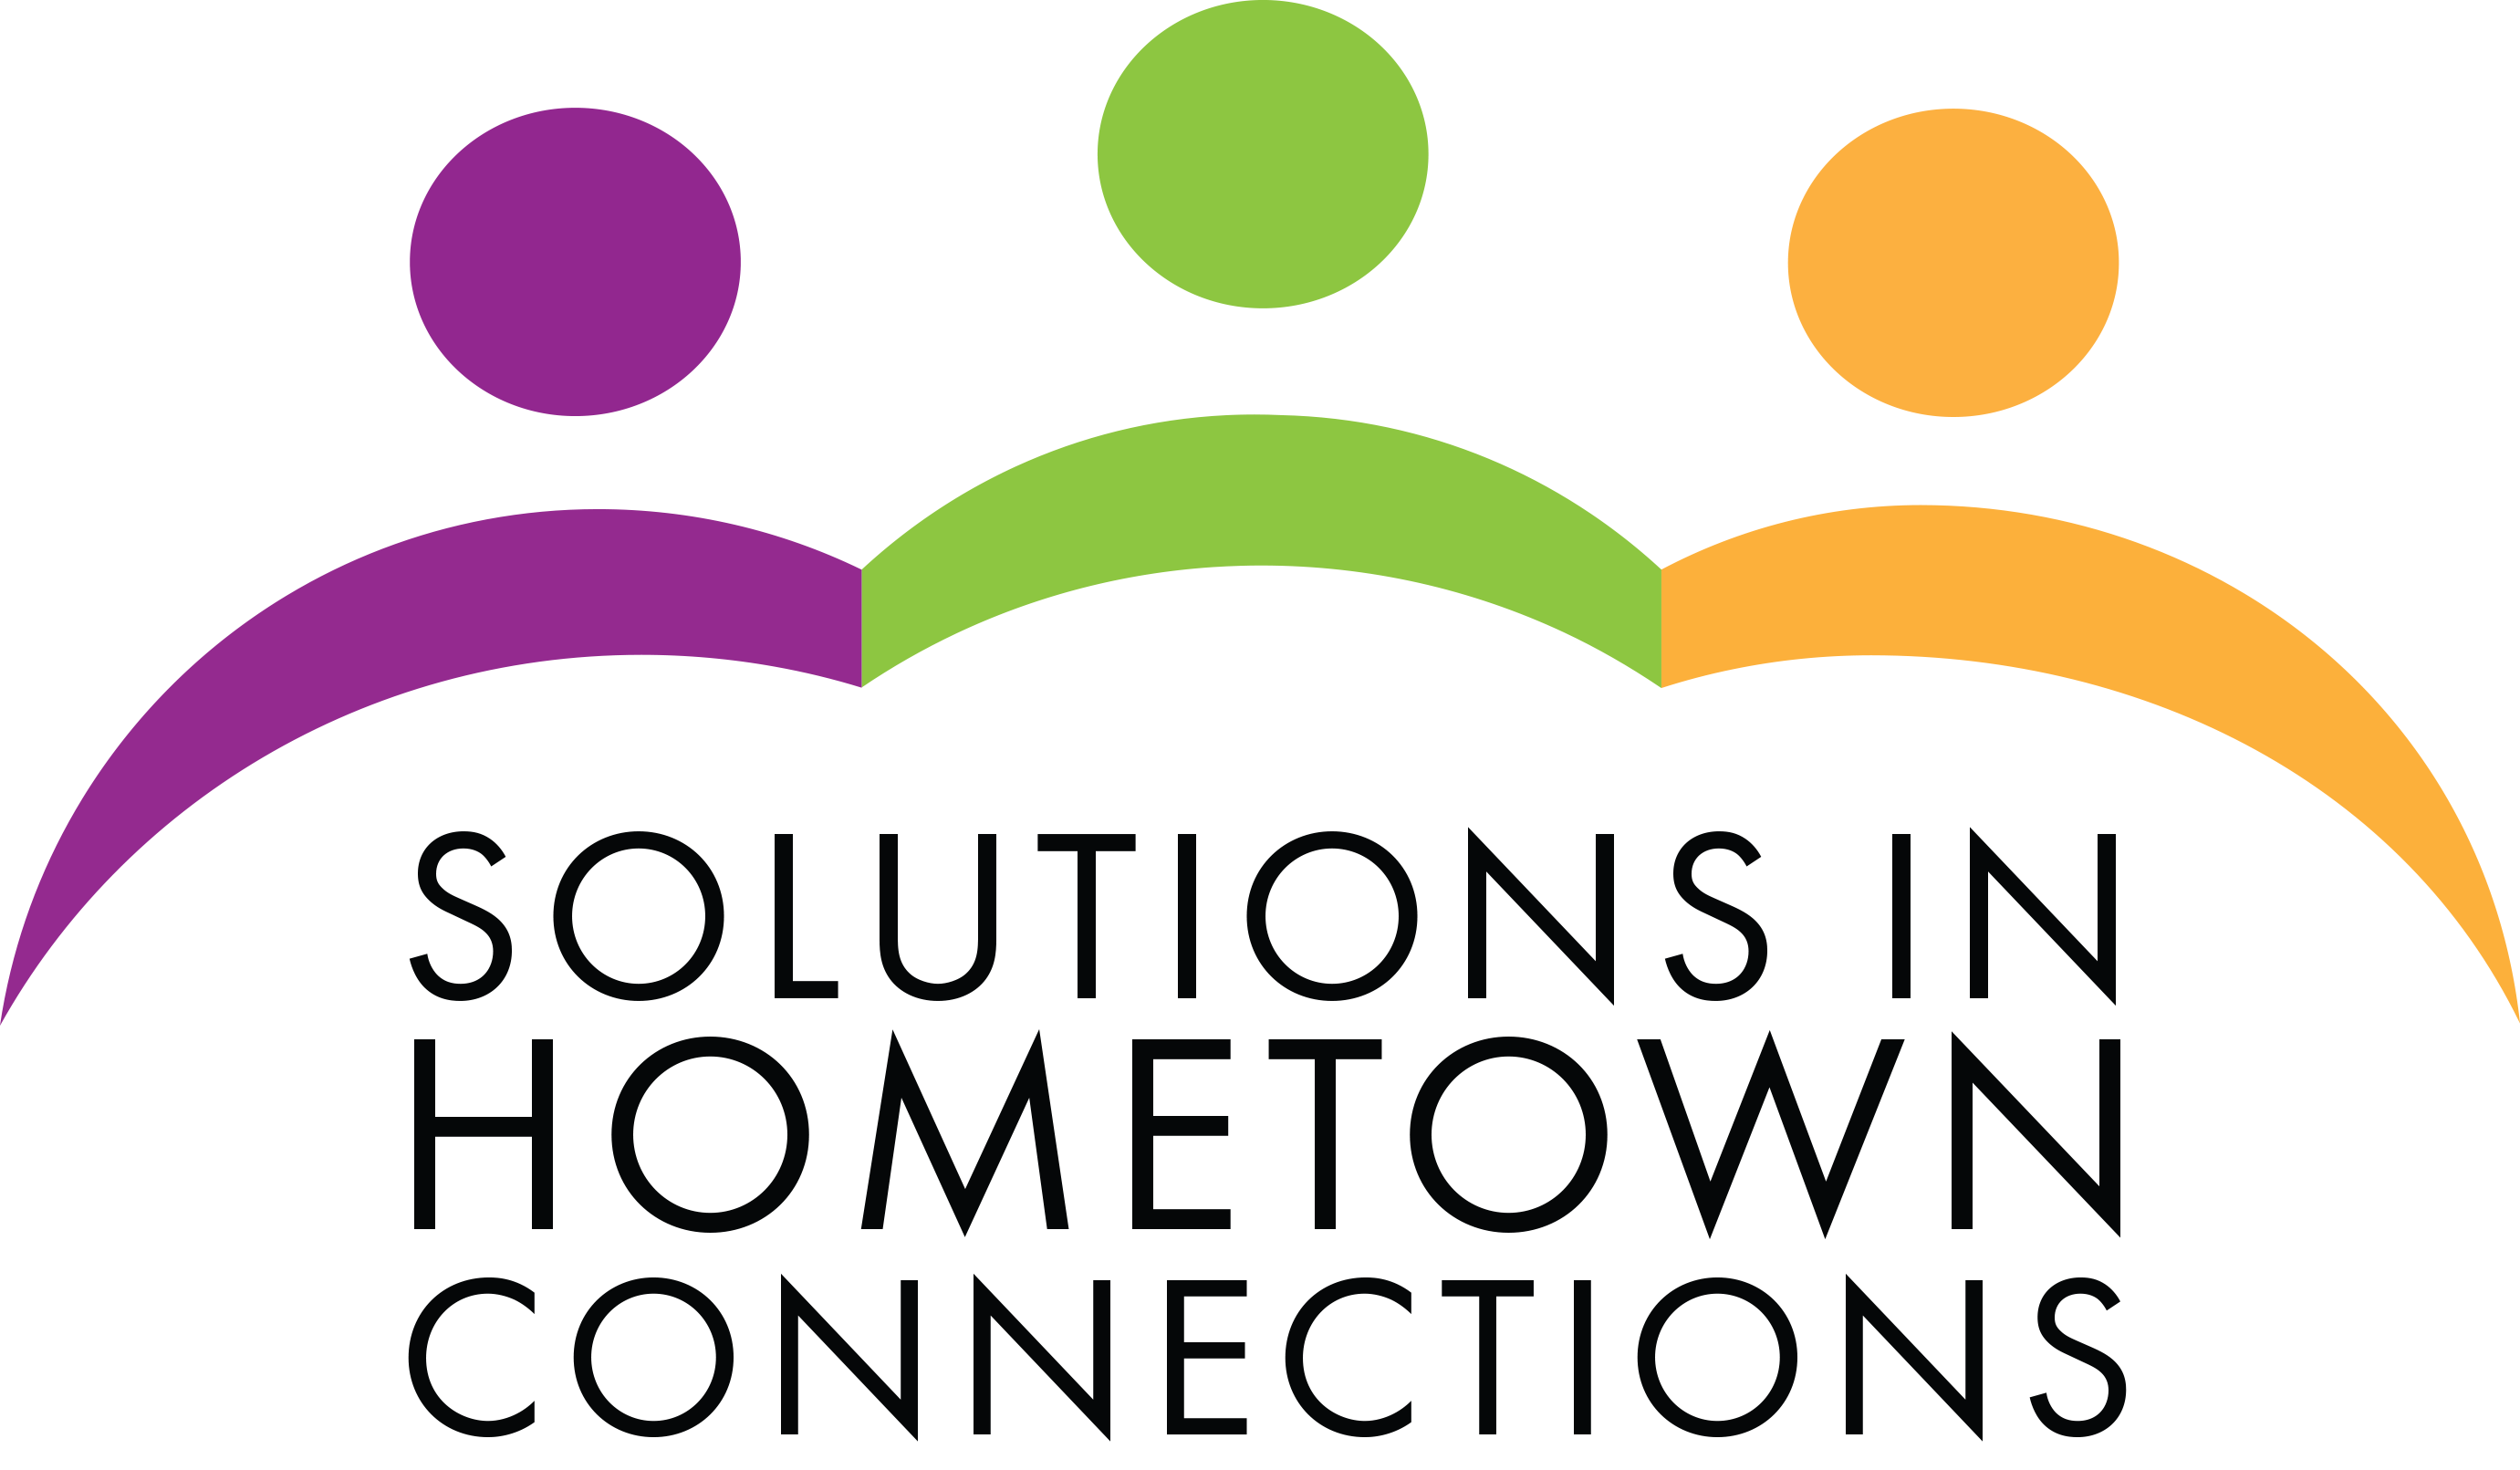 Solutions in Hometown Connections logo